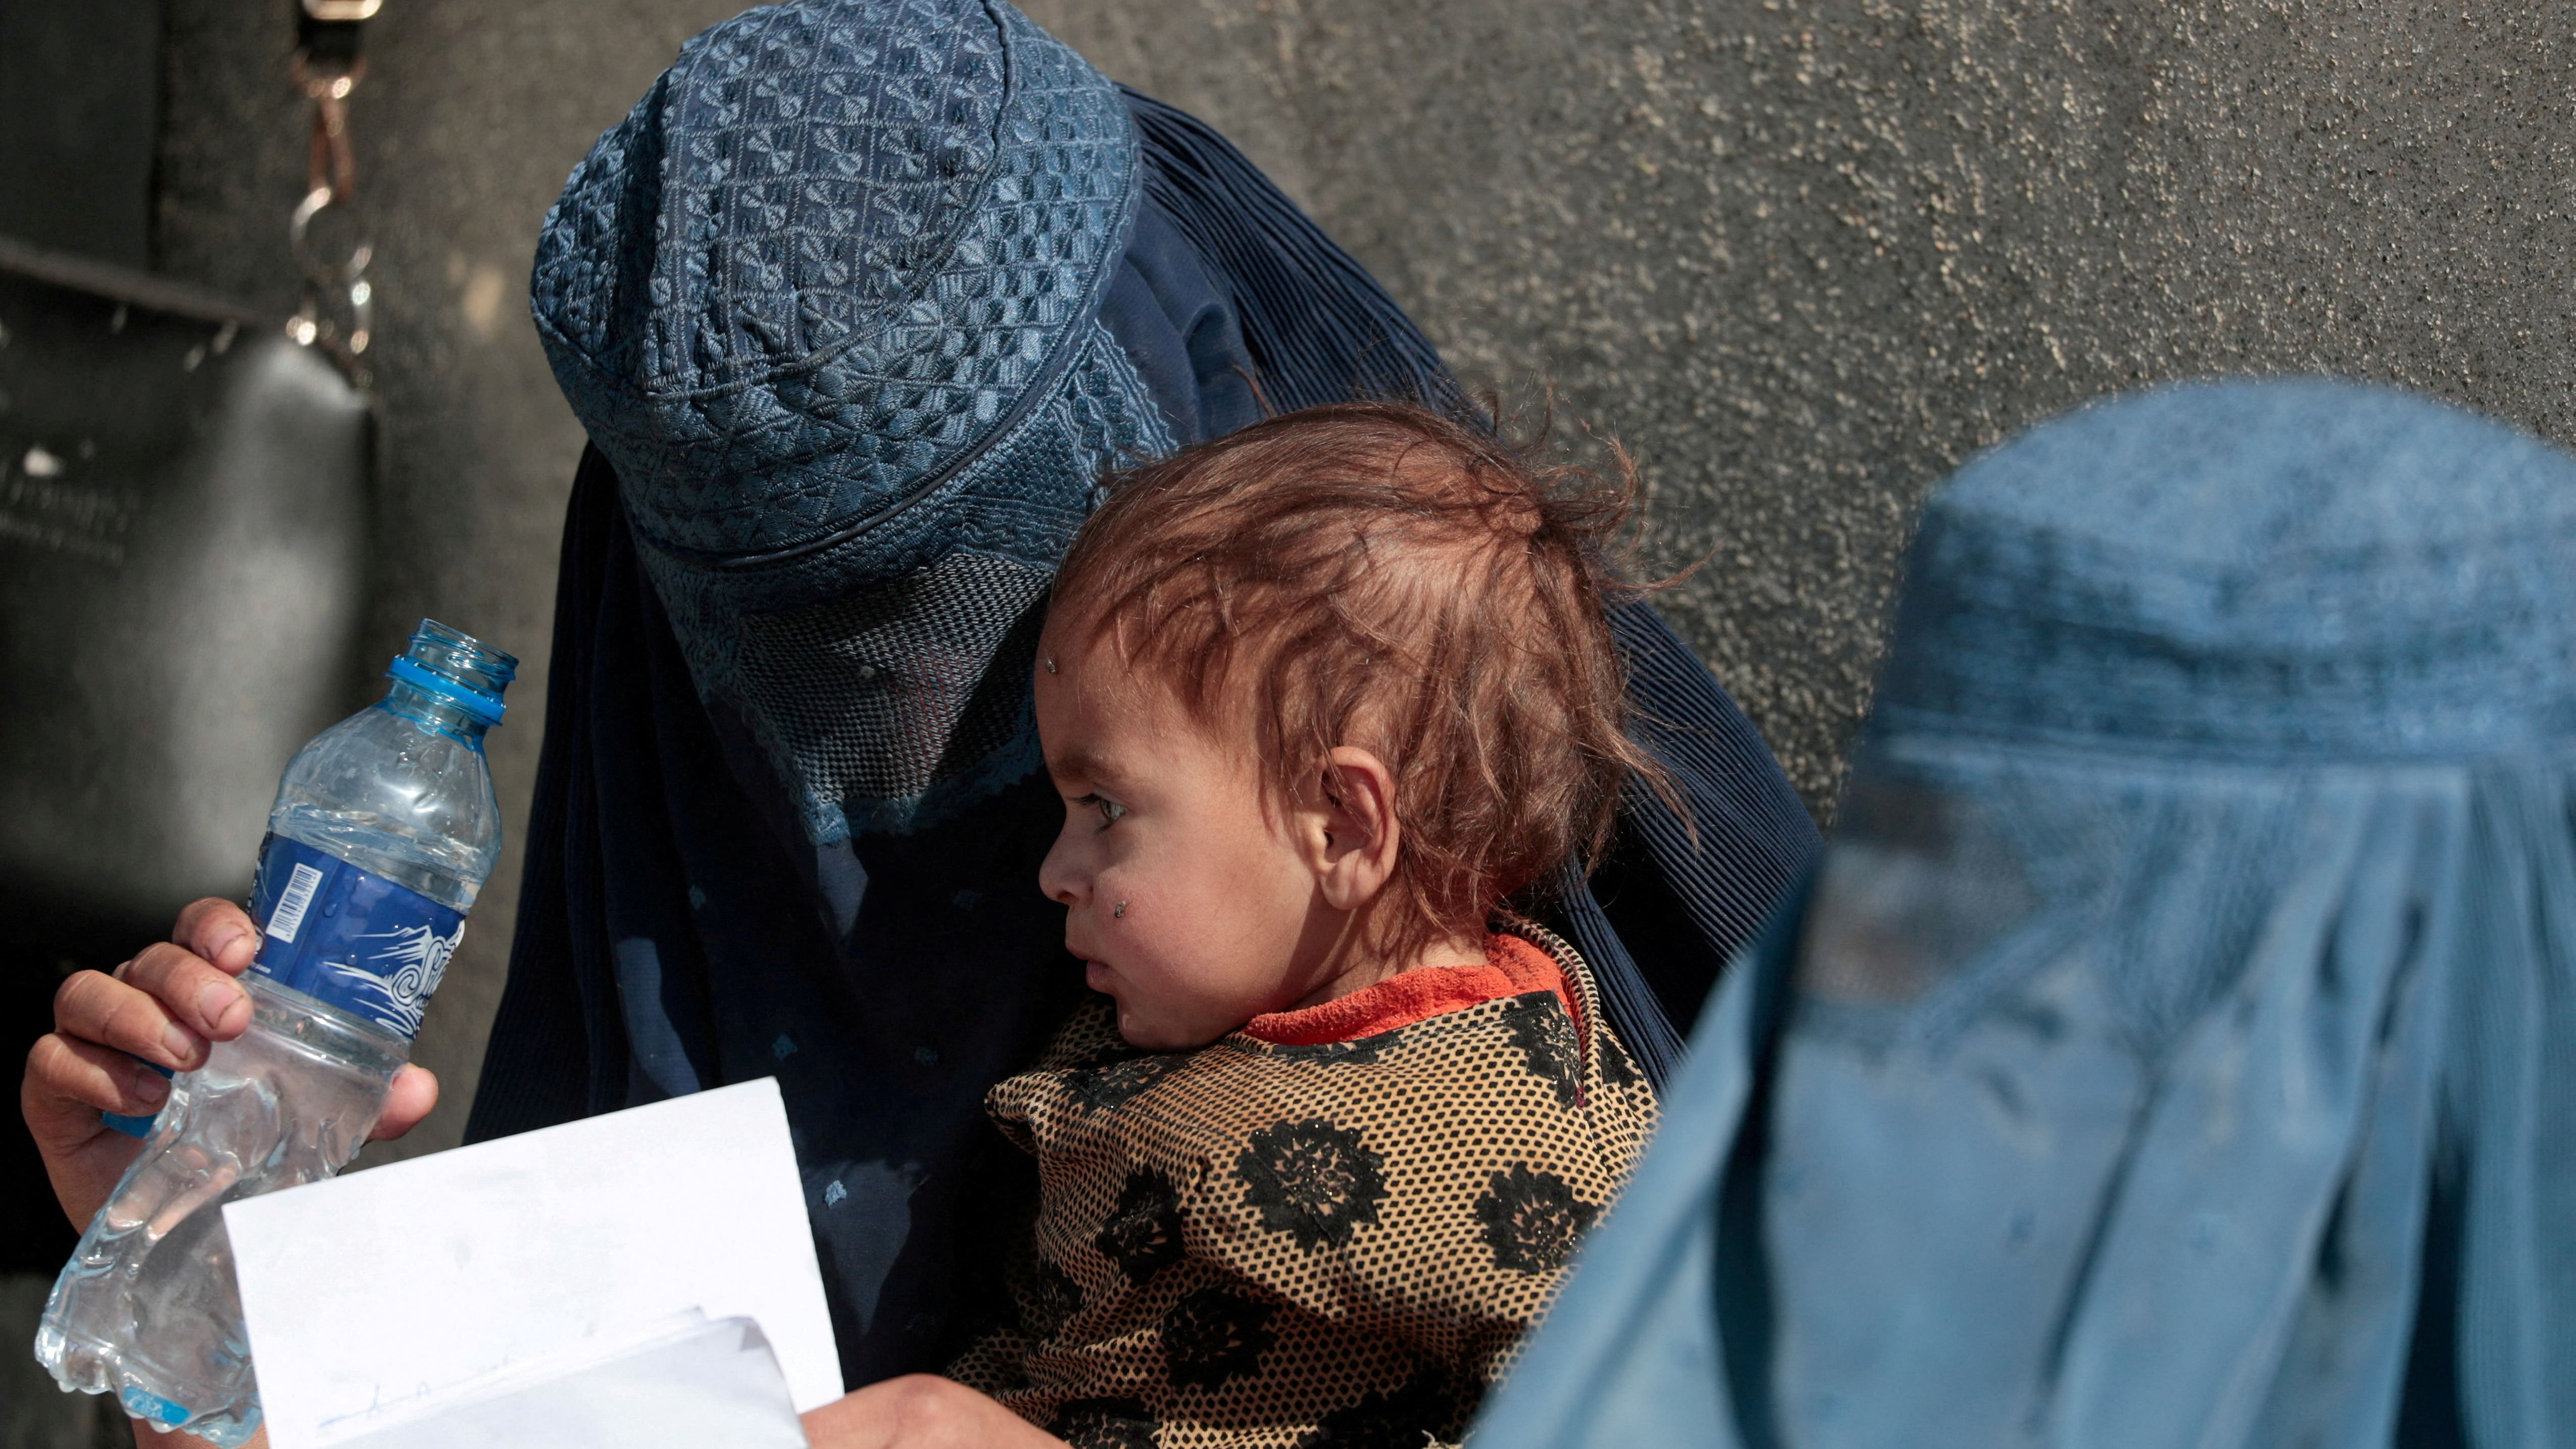 In late December, the Taliban barred aid groups from employing women, paralysing deliveries that help keep millions of Afghans alive, and threatening humanitarian services countrywide. In addition, thousands of women who work for aid organisations across the war-battered country are facing the loss of income they desperately need to feed their own families. Credit: Reuters File Photo